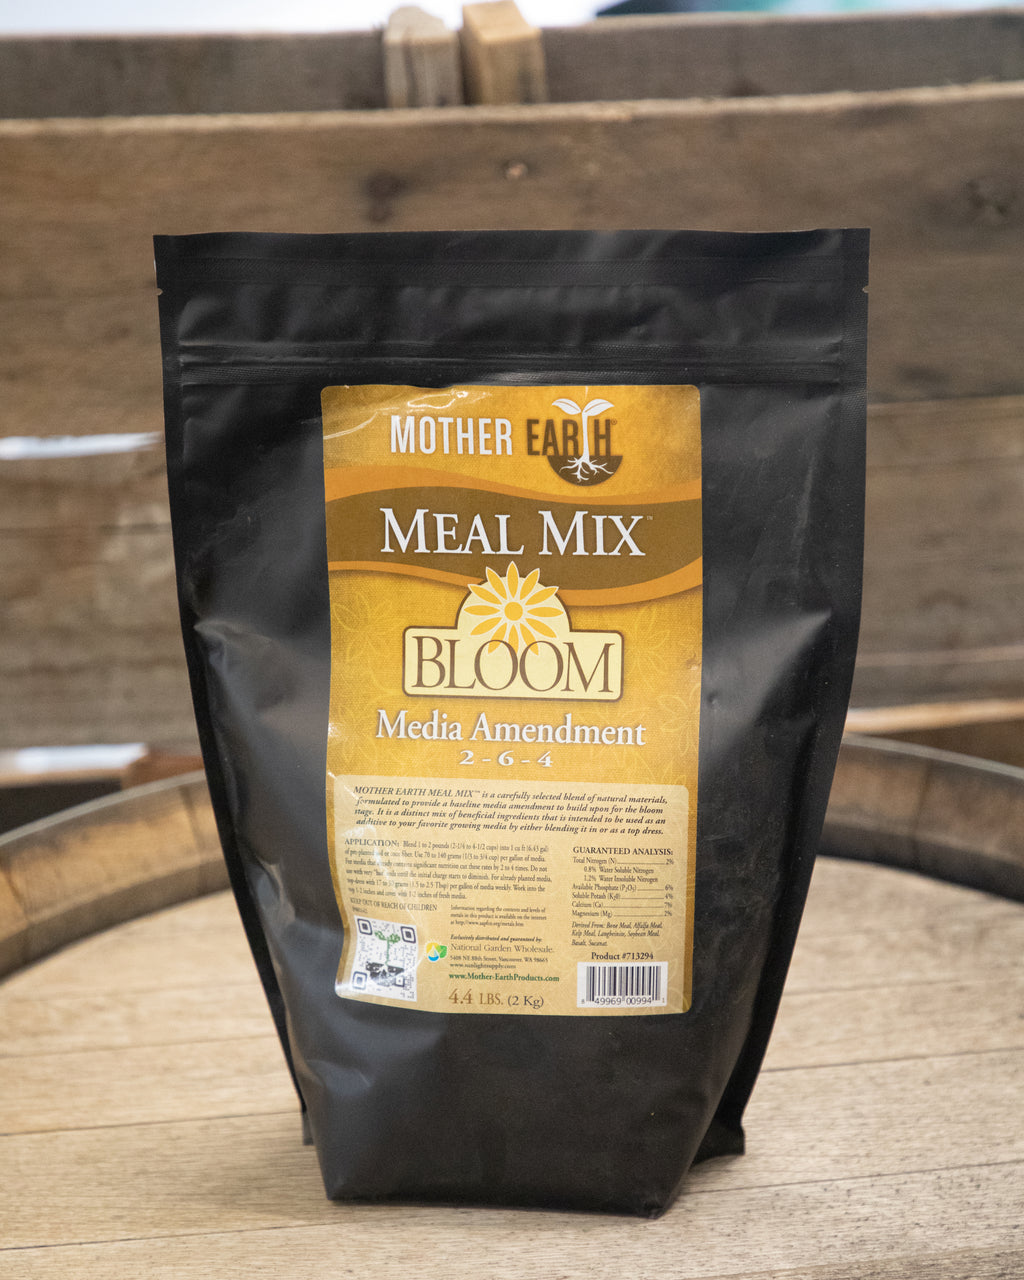 Mother Earth Meal Mix® Bloom 2-6-4 - Shasta Forest Products, Inc